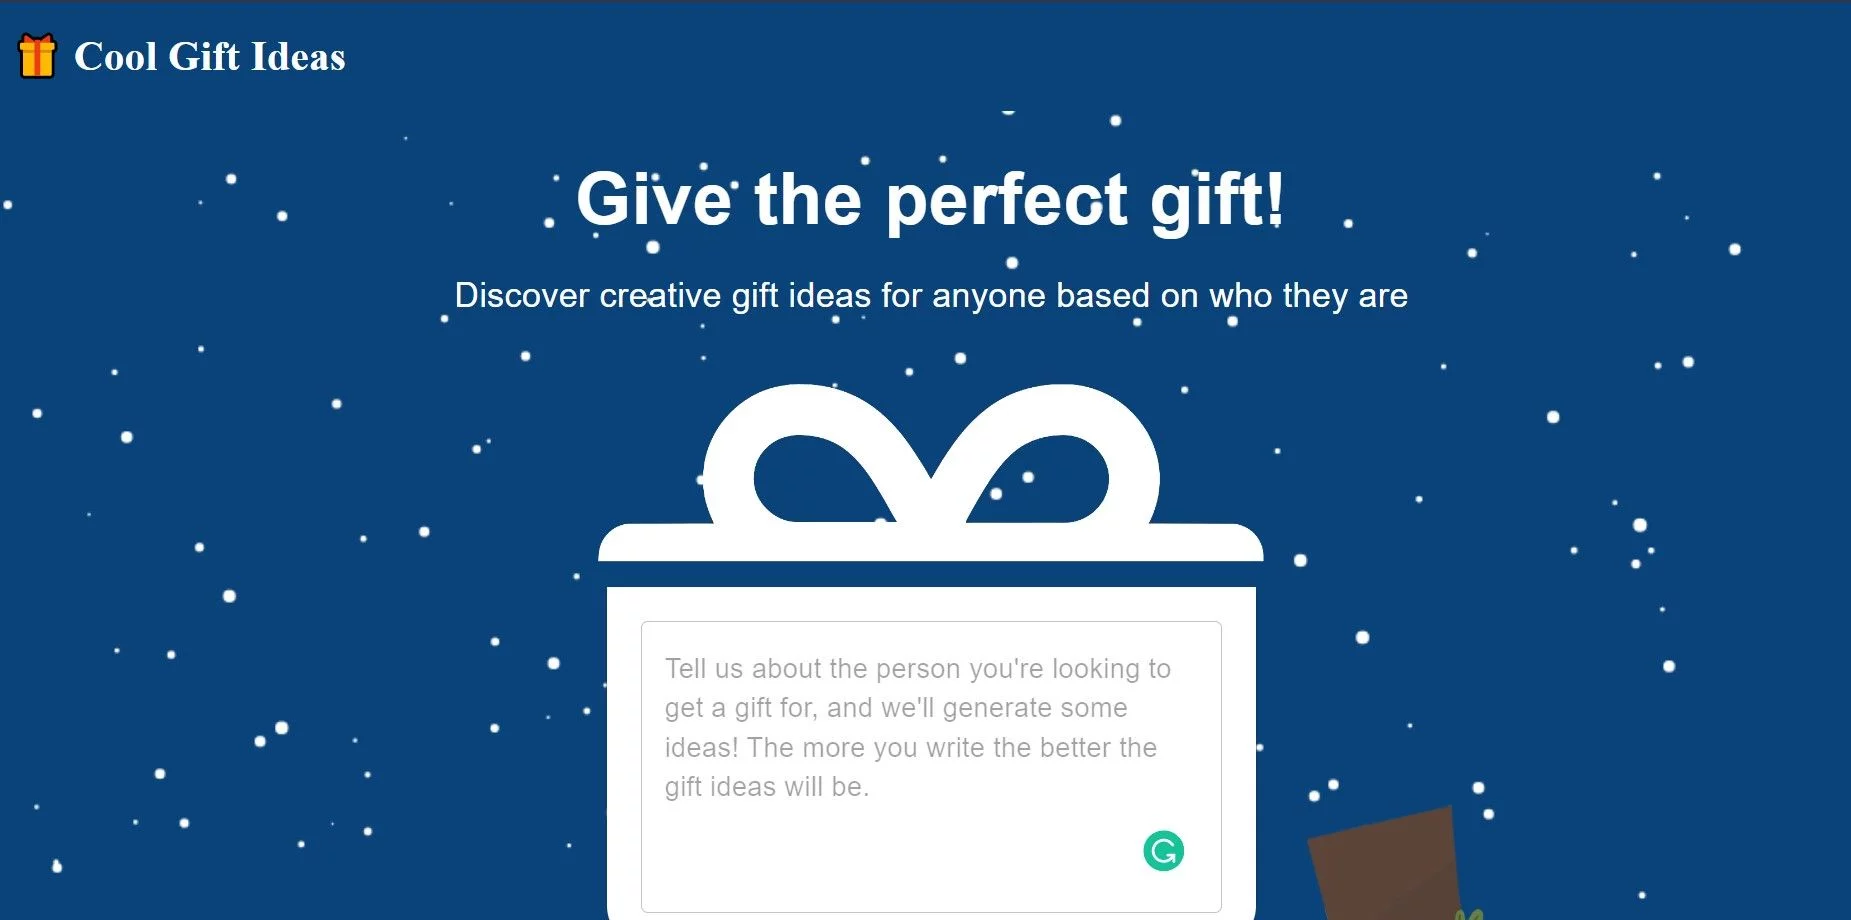  Find the perfect gift for anyone with creative